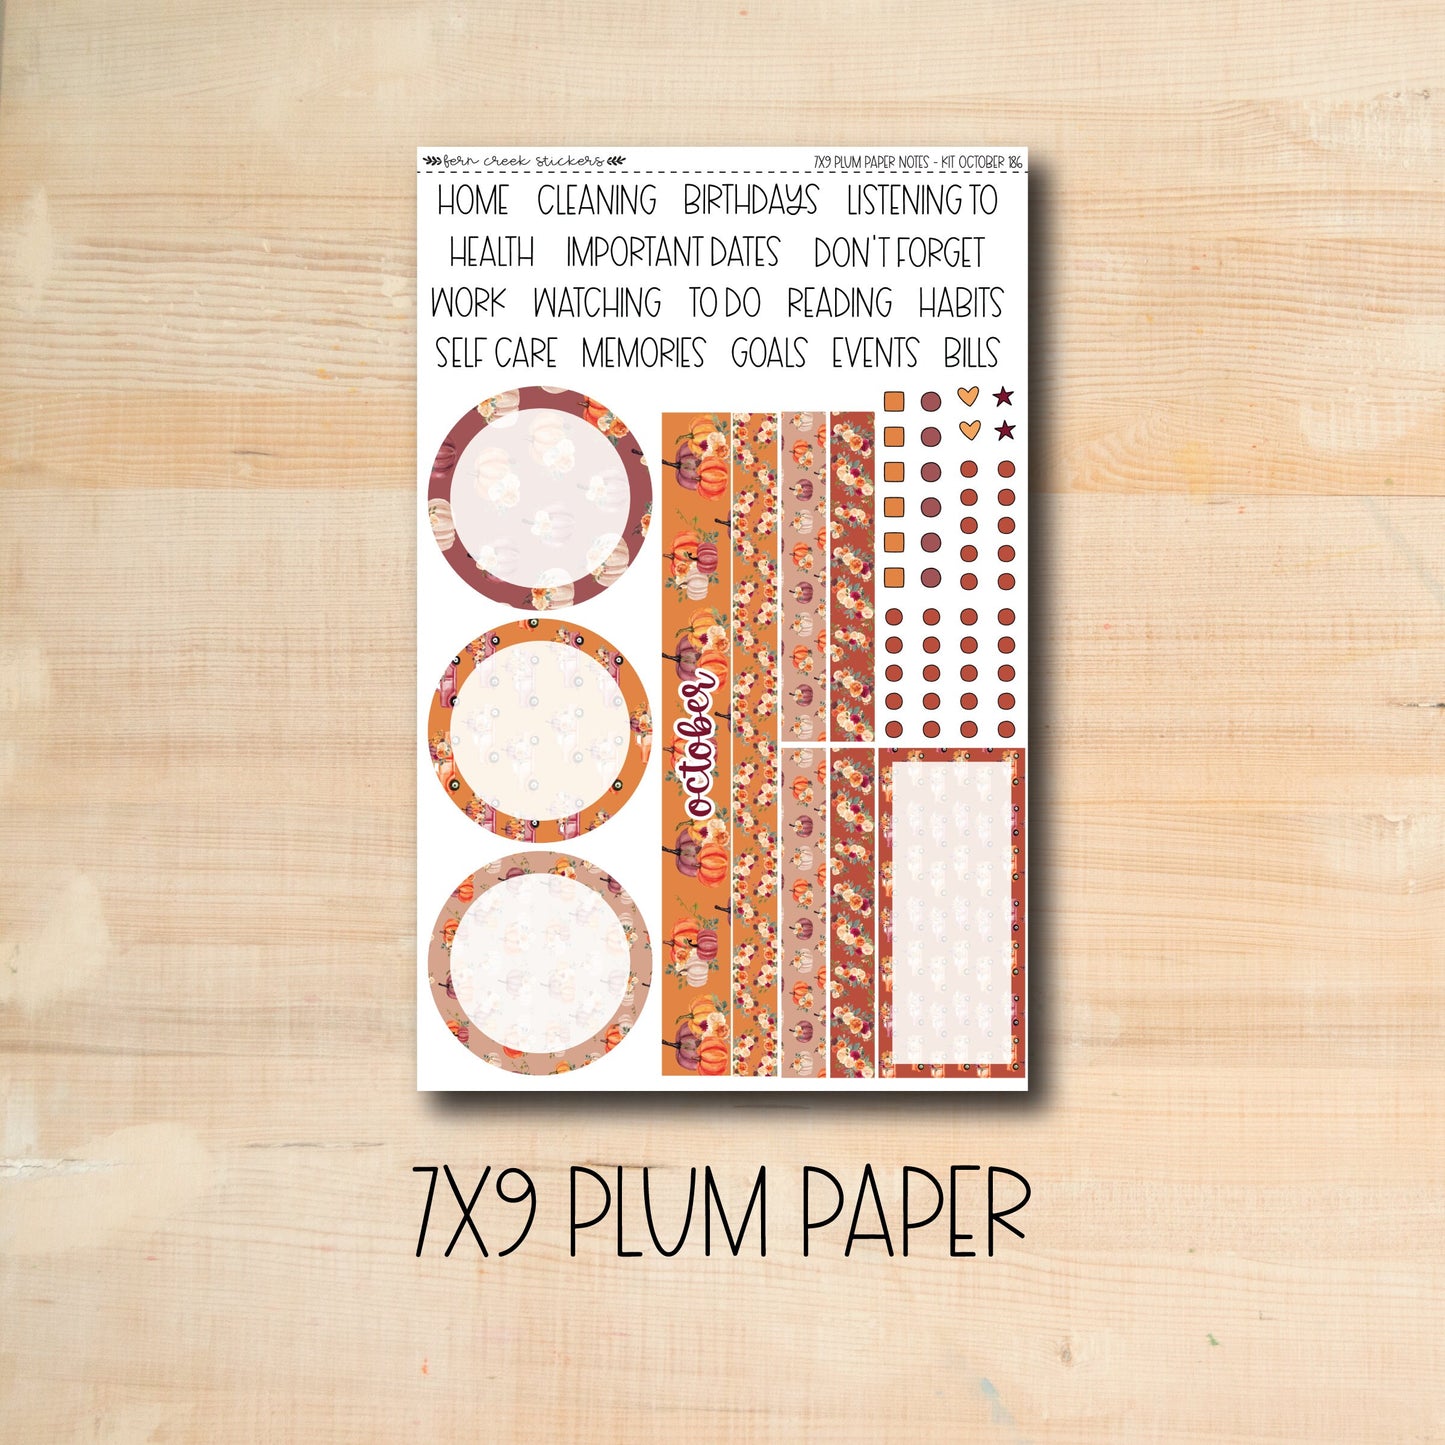 7x9 Plum NOTES-186 || PUMPKIN PICKING 7x9 Plum Paper October notes page